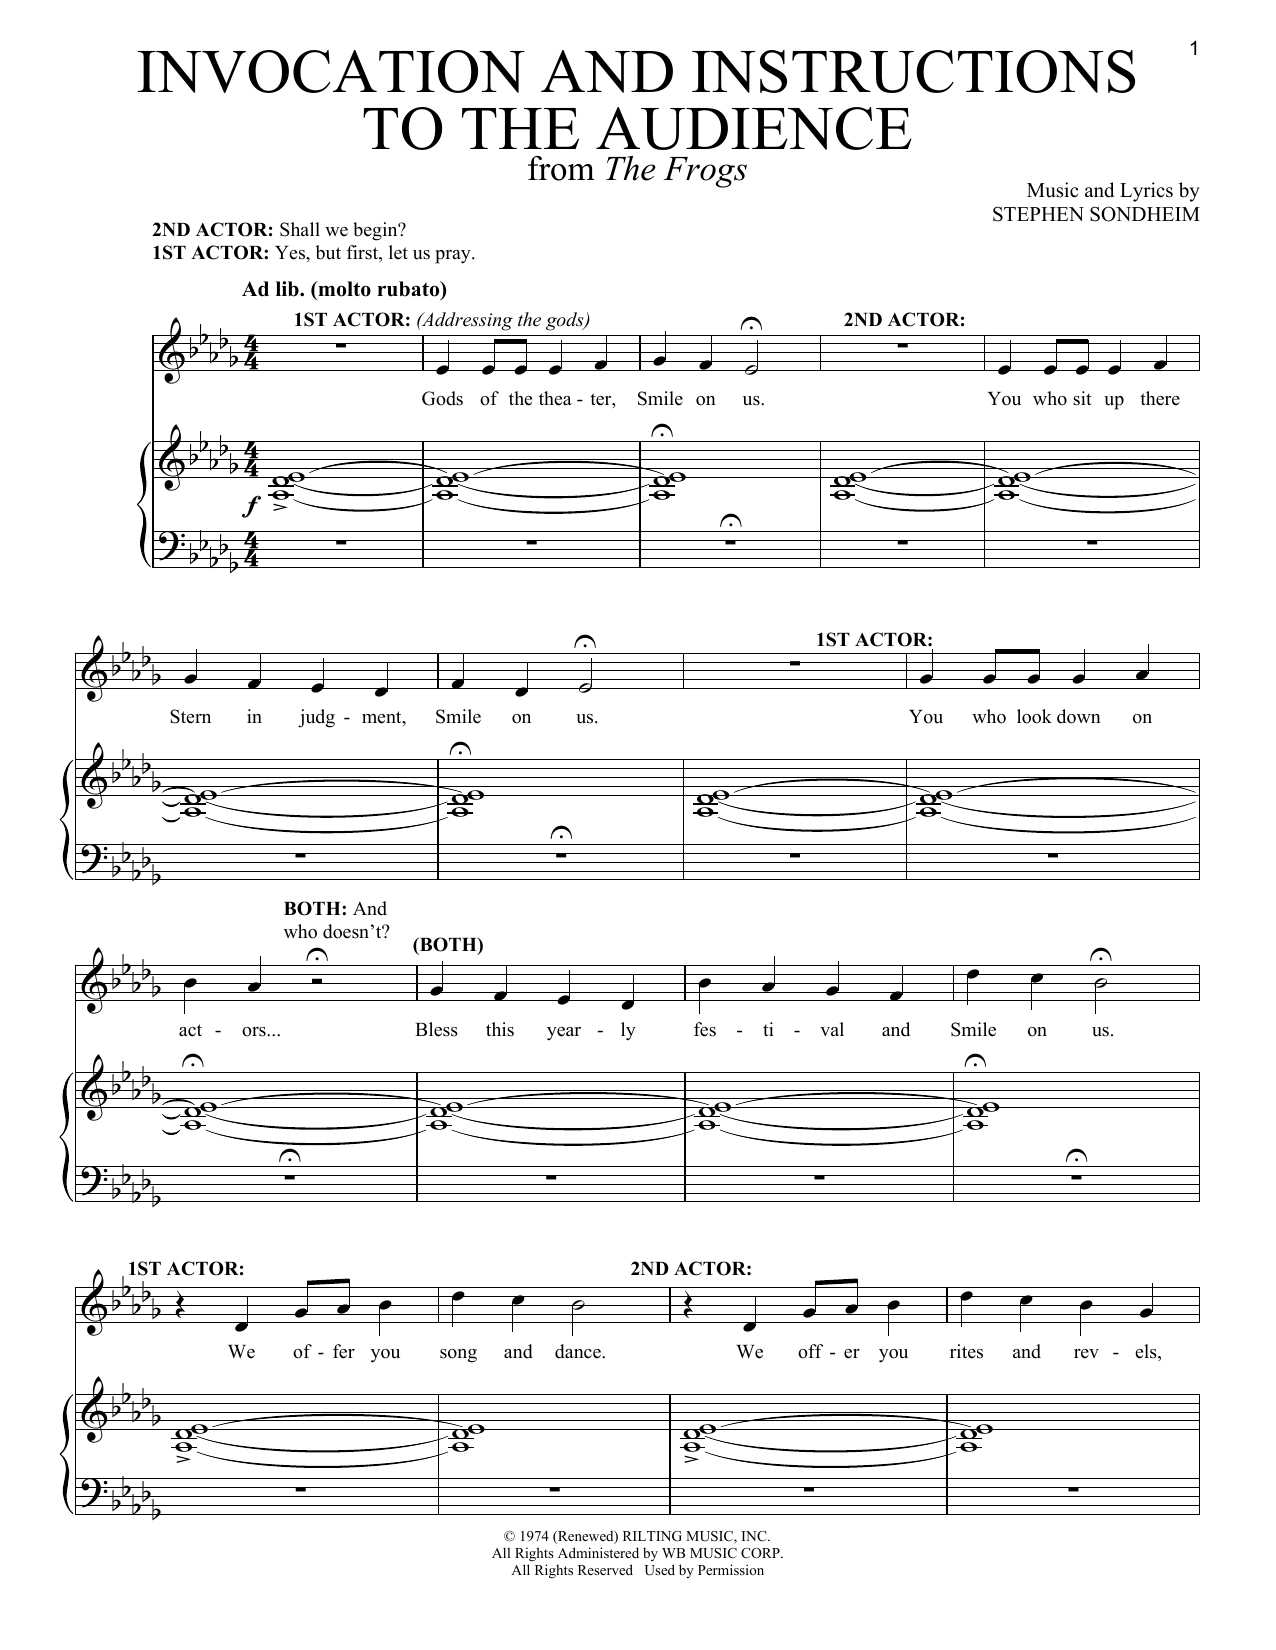 Download Stephen Sondheim Invocation And Instructions To The Audi Sheet Music